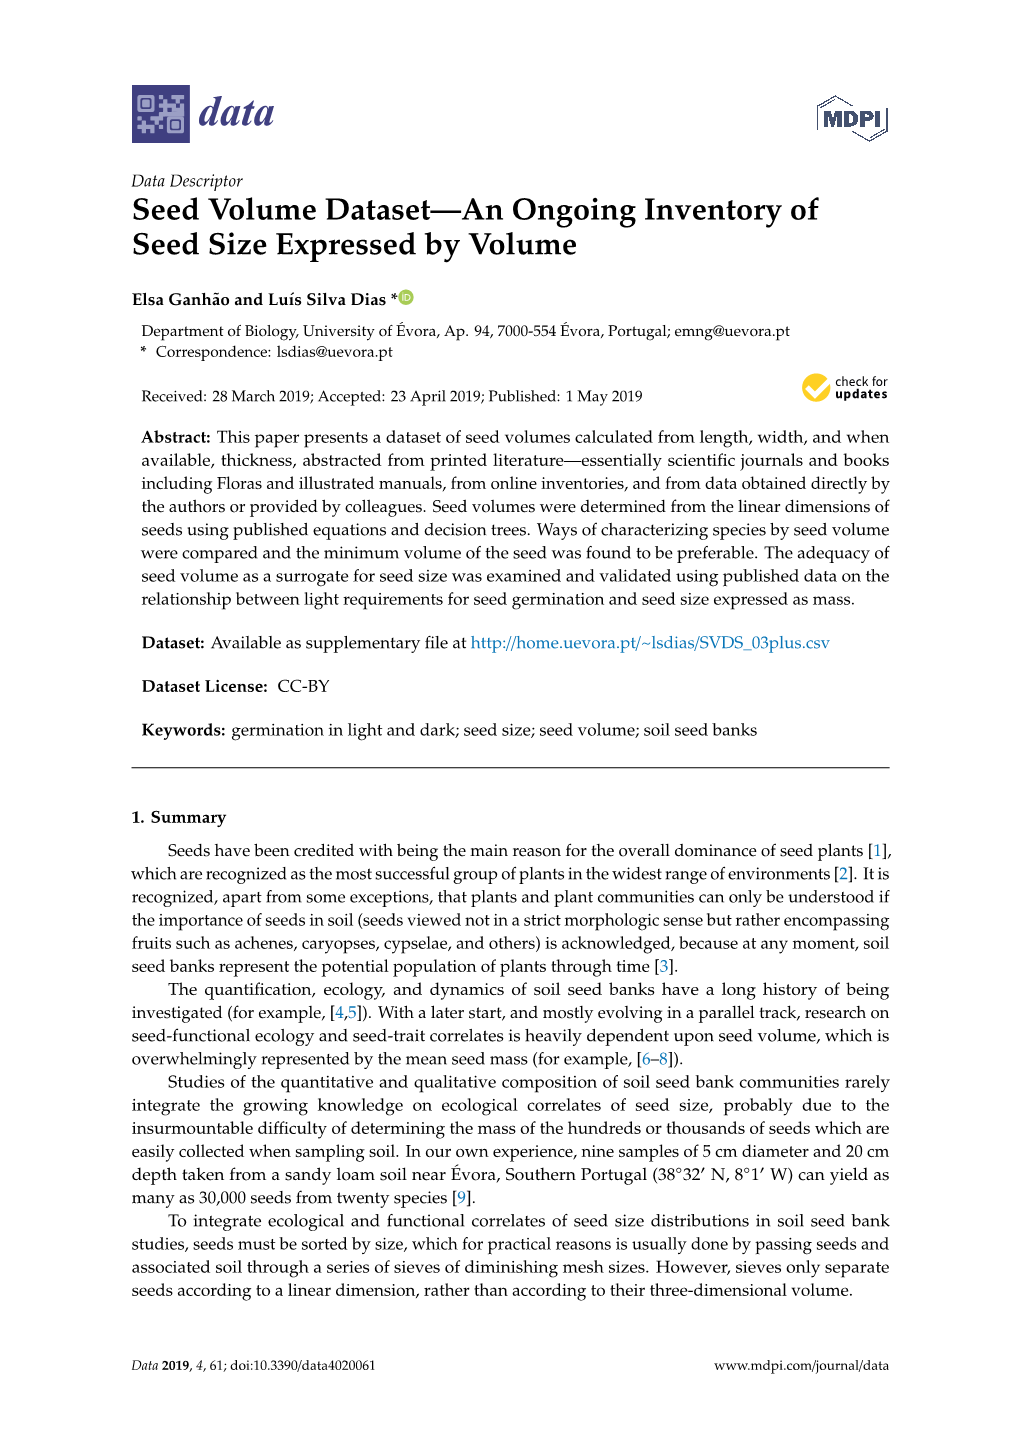 Seed Volume Dataset—An Ongoing Inventory of Seed Size Expressed by Volume